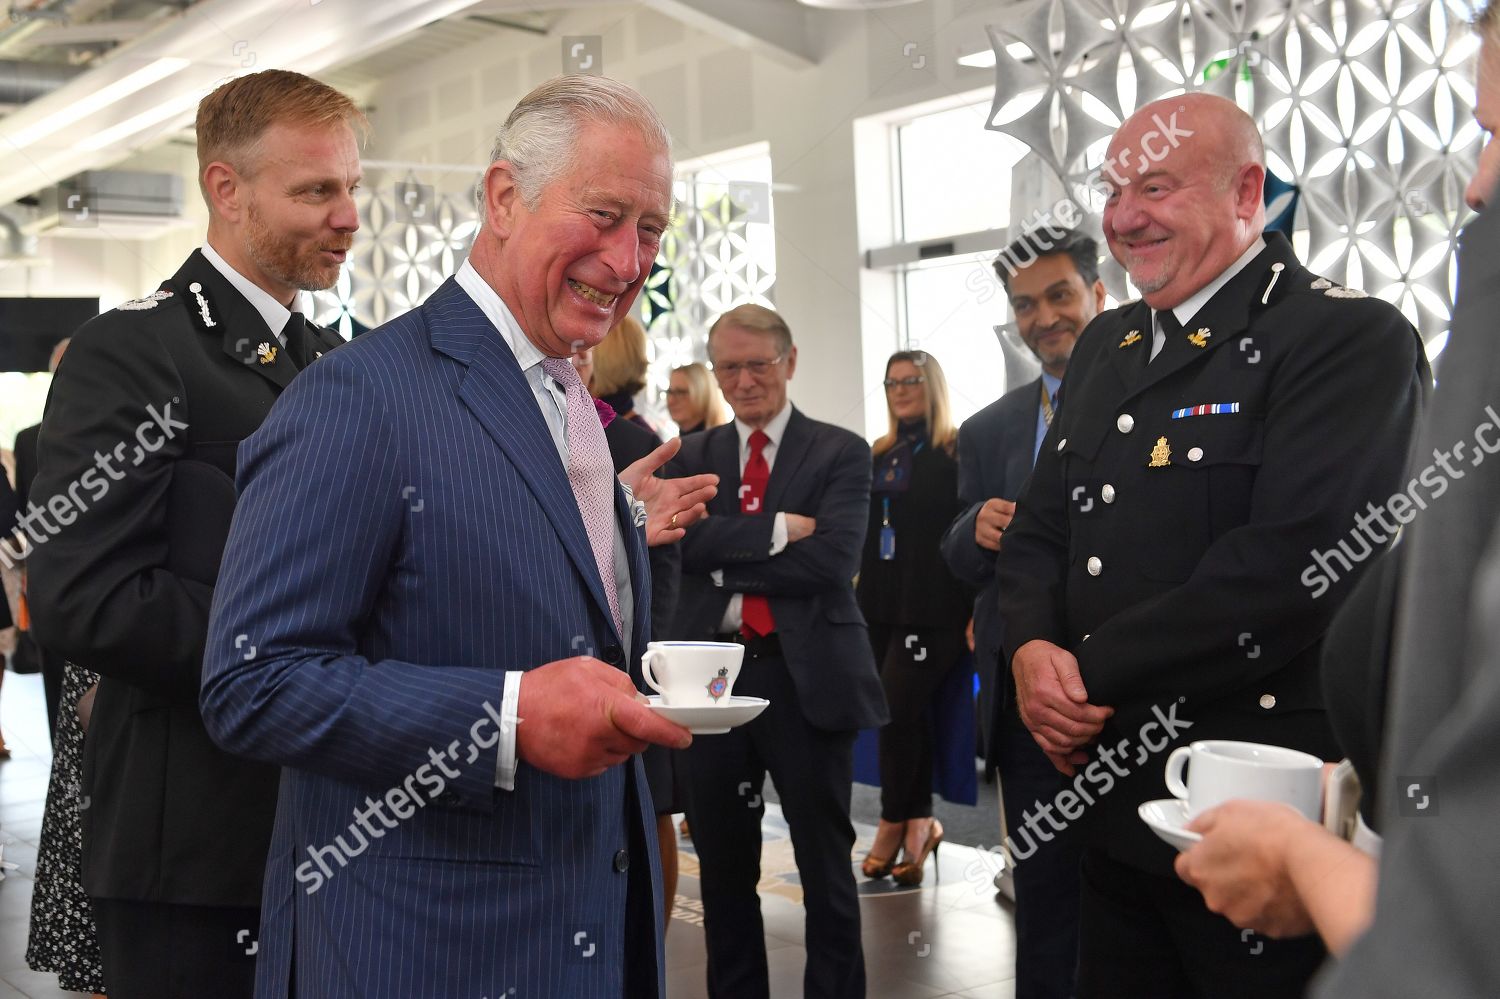 prince-charles-visit-to-wales-uk-shutterstock-editorial-10326139o.jpg